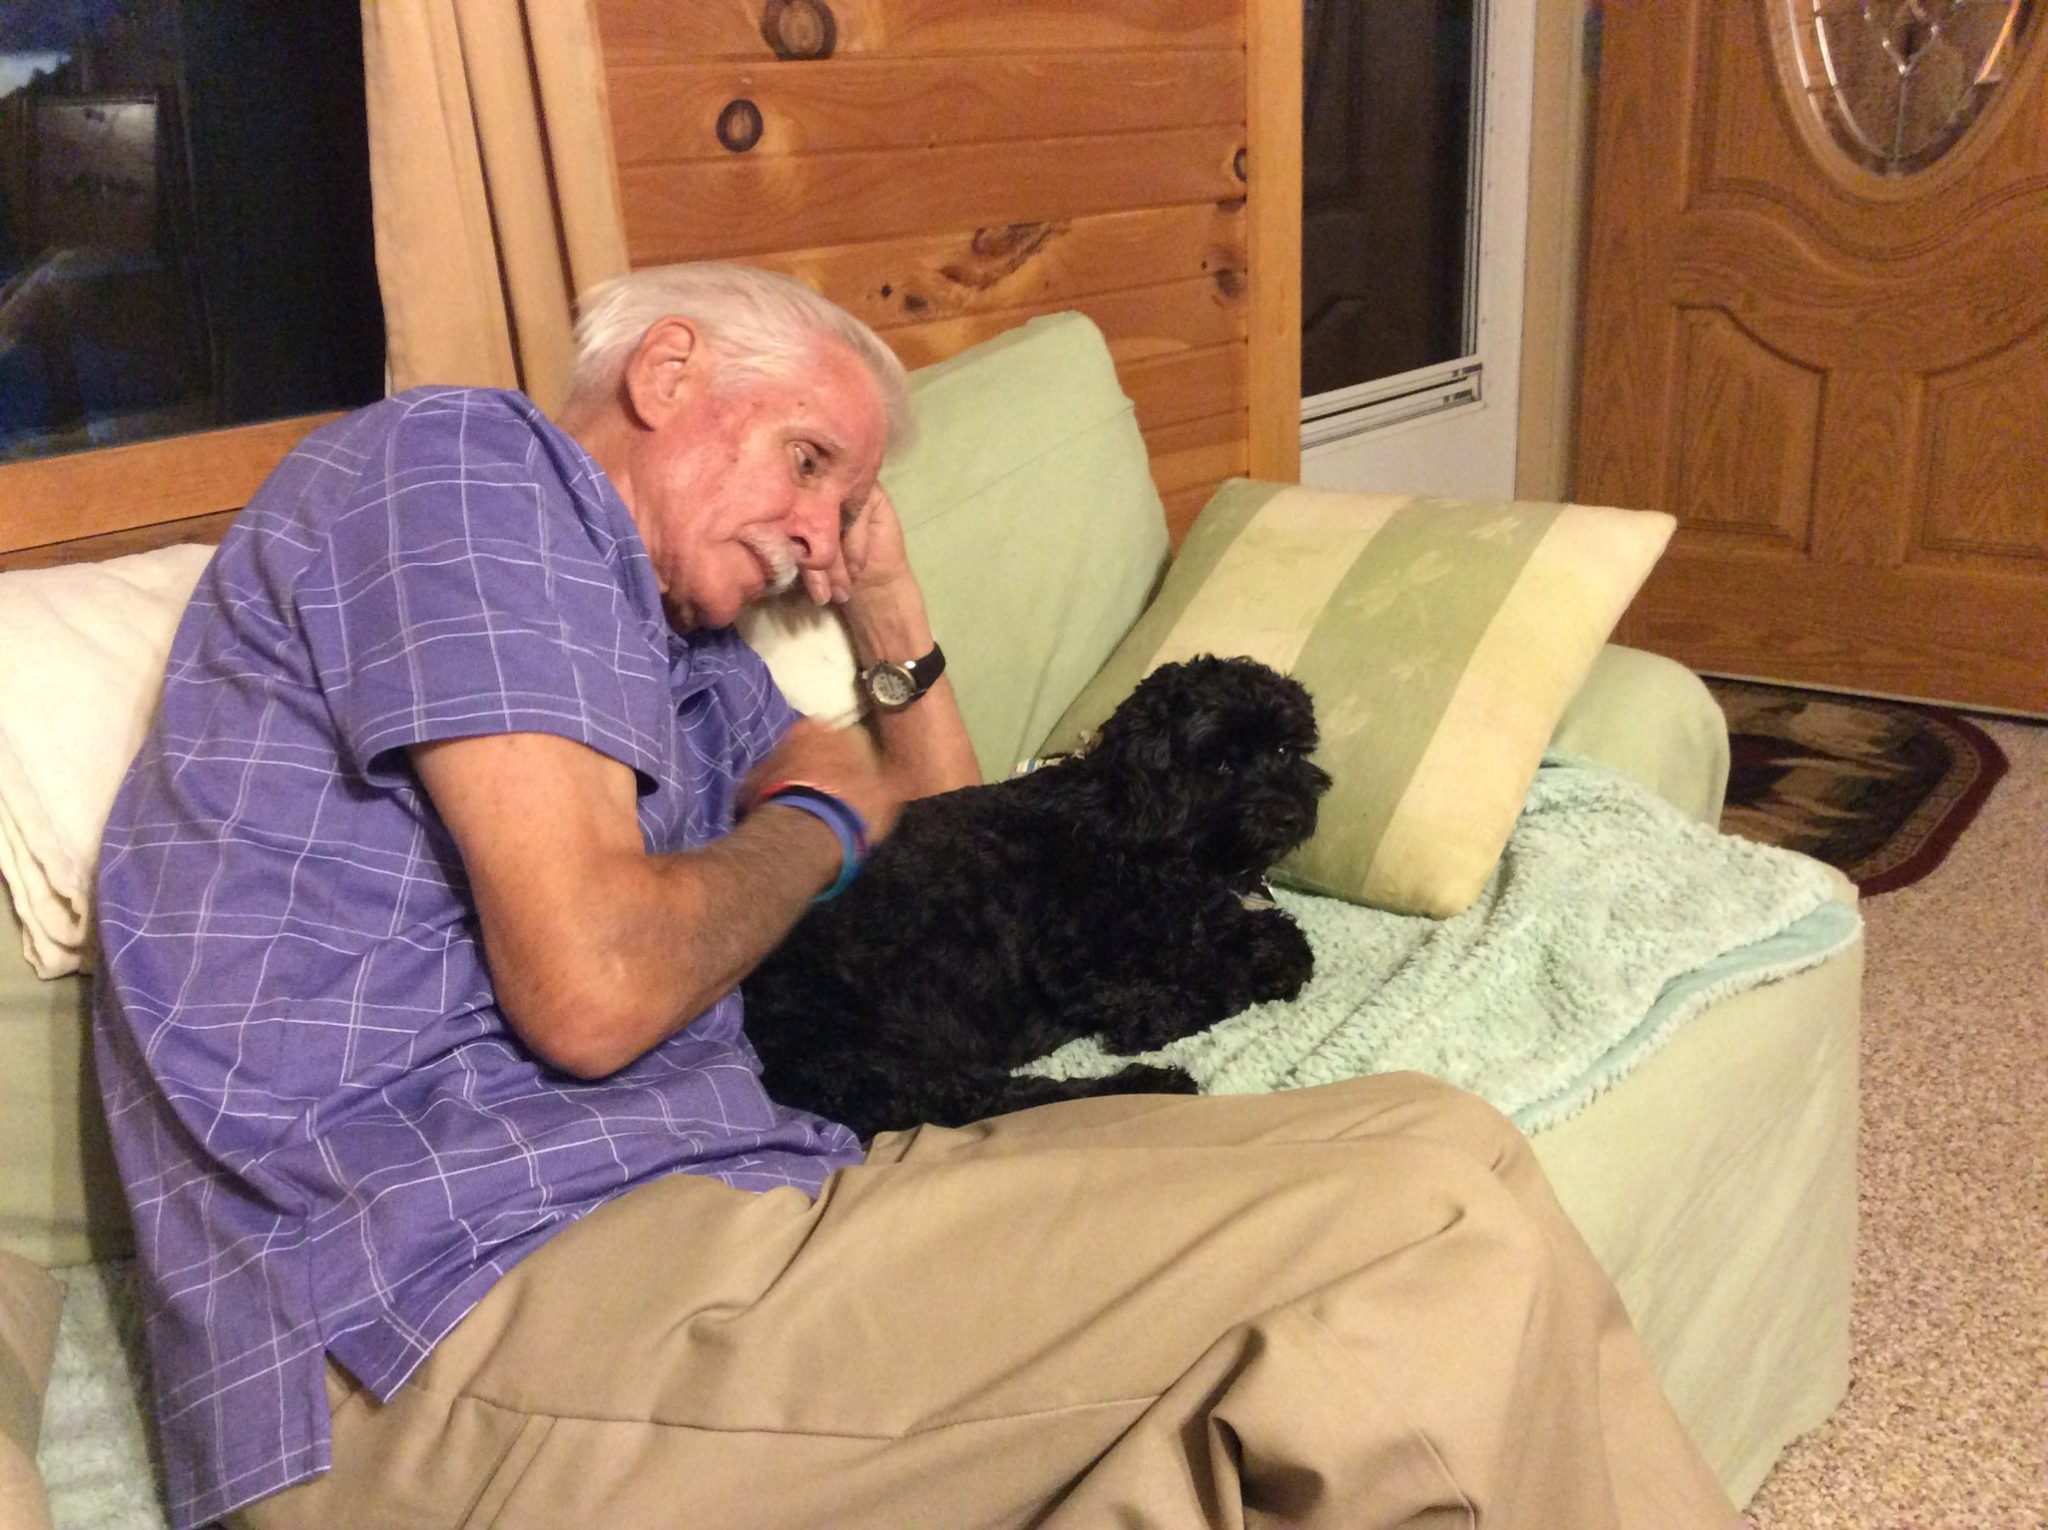 We are so grateful that Val and Bill were able to visit us last summer. This photo of him with our cockerpoo Holly captures his sweet soul so well. We will miss him so much. Our deepest condolences go out to Val and the whole family.